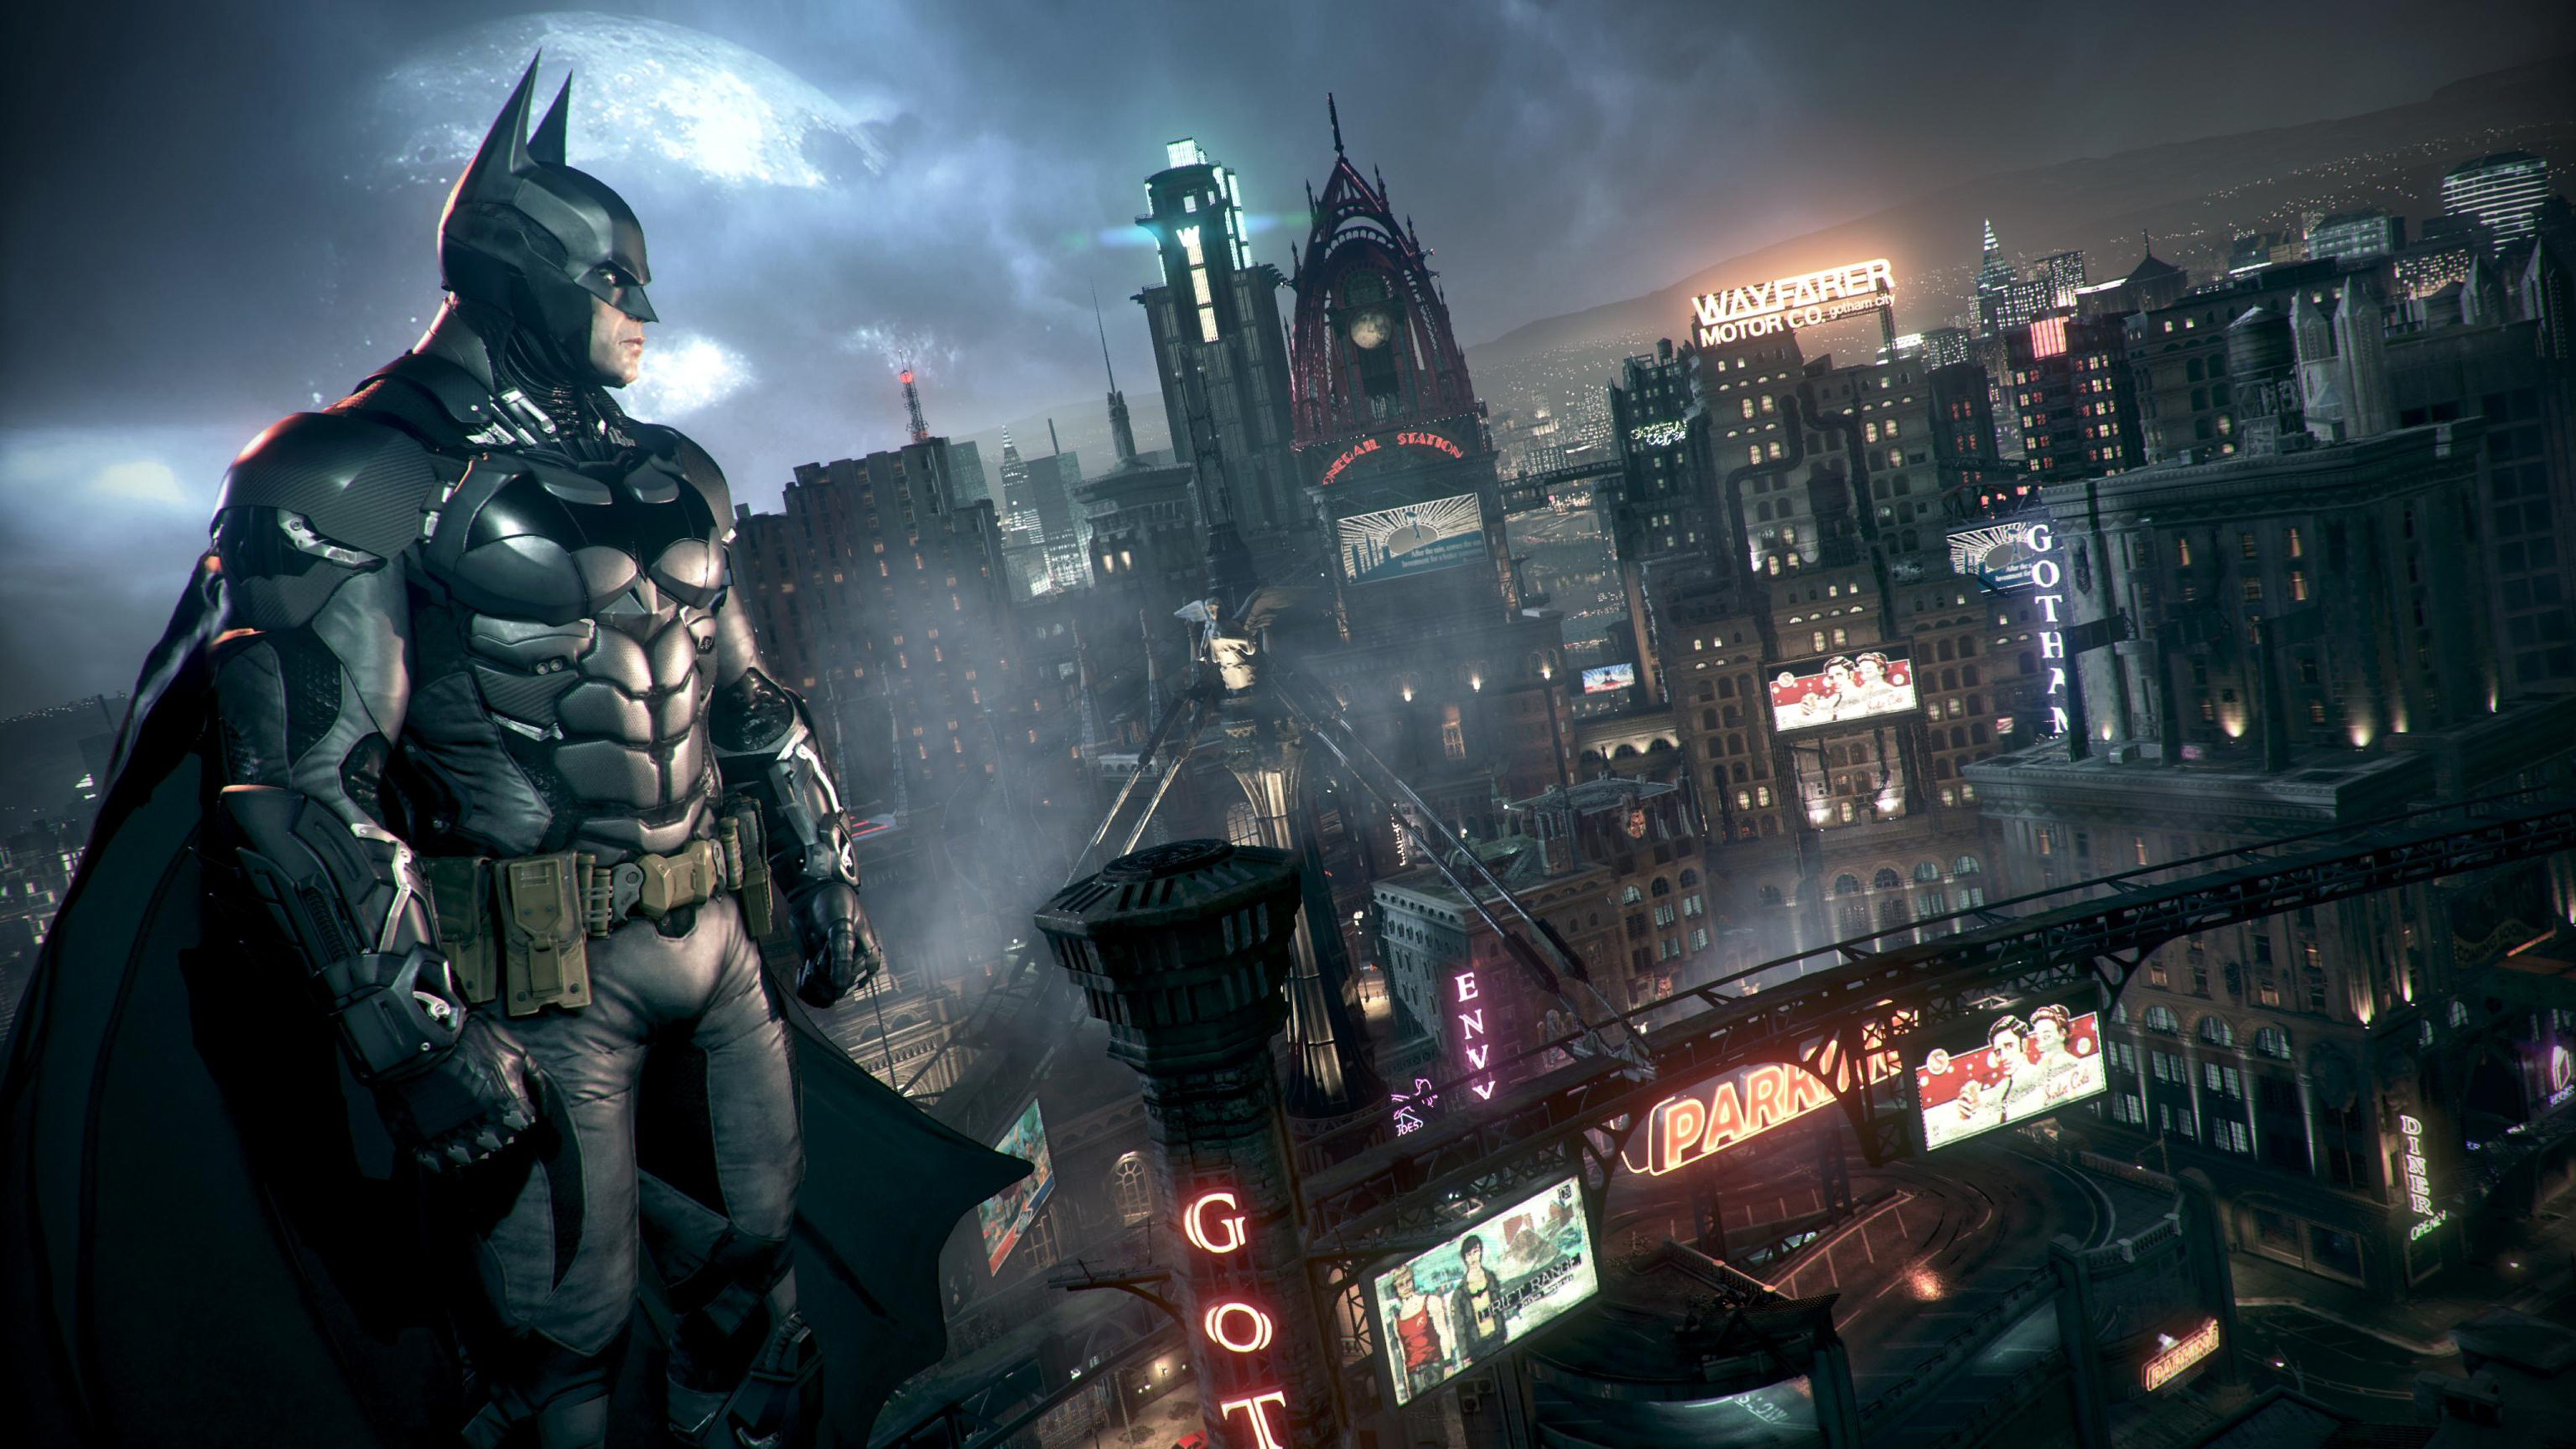 Batman Arkham Knight Full Hd Wallpaper Download For Mobile And Pc Wallpapers13 Com